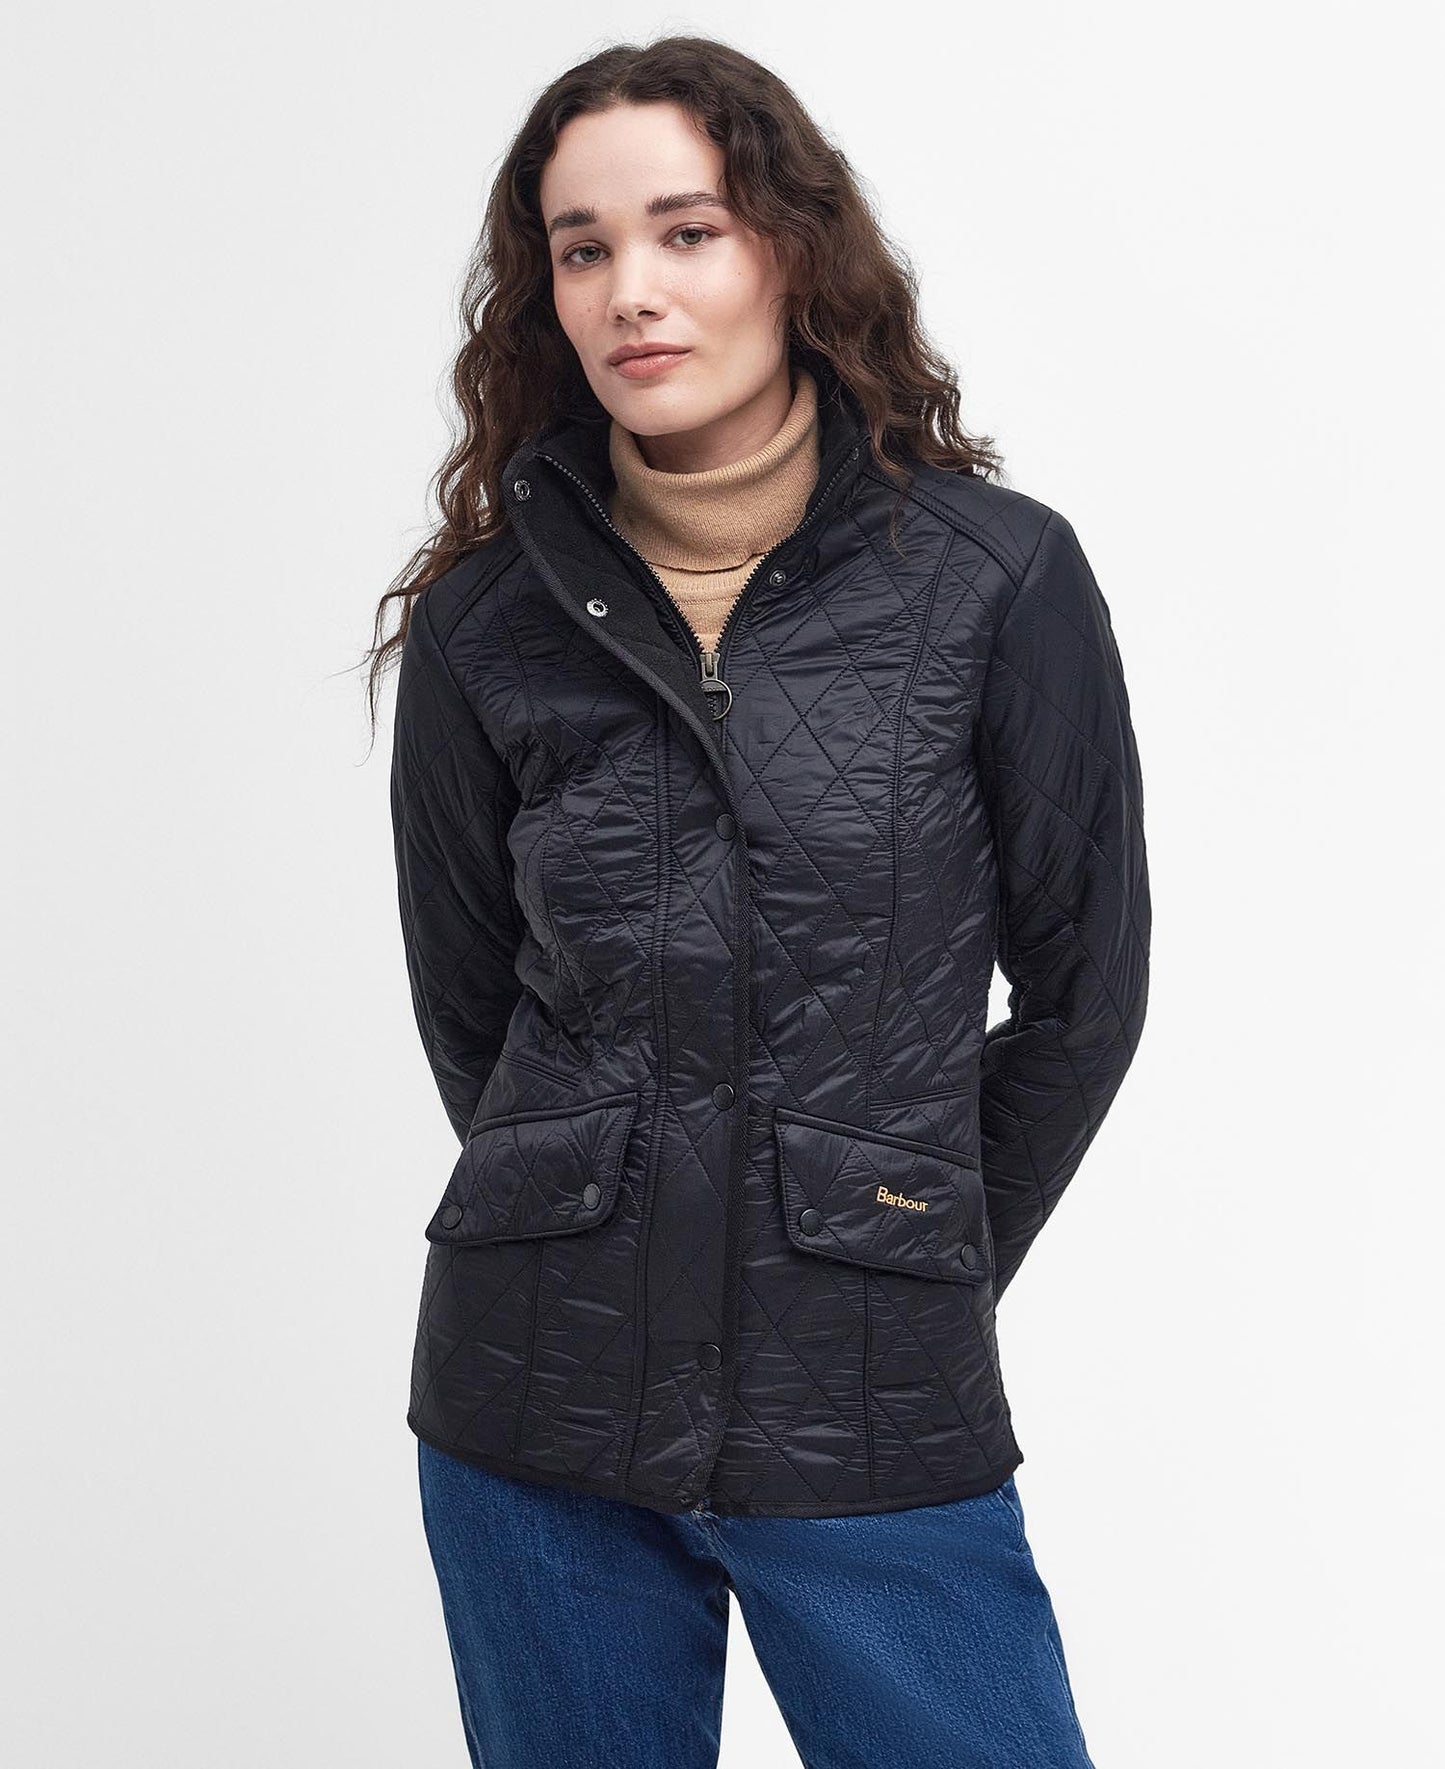 Barbour Cavalry Polarquilt Quilted Jacket